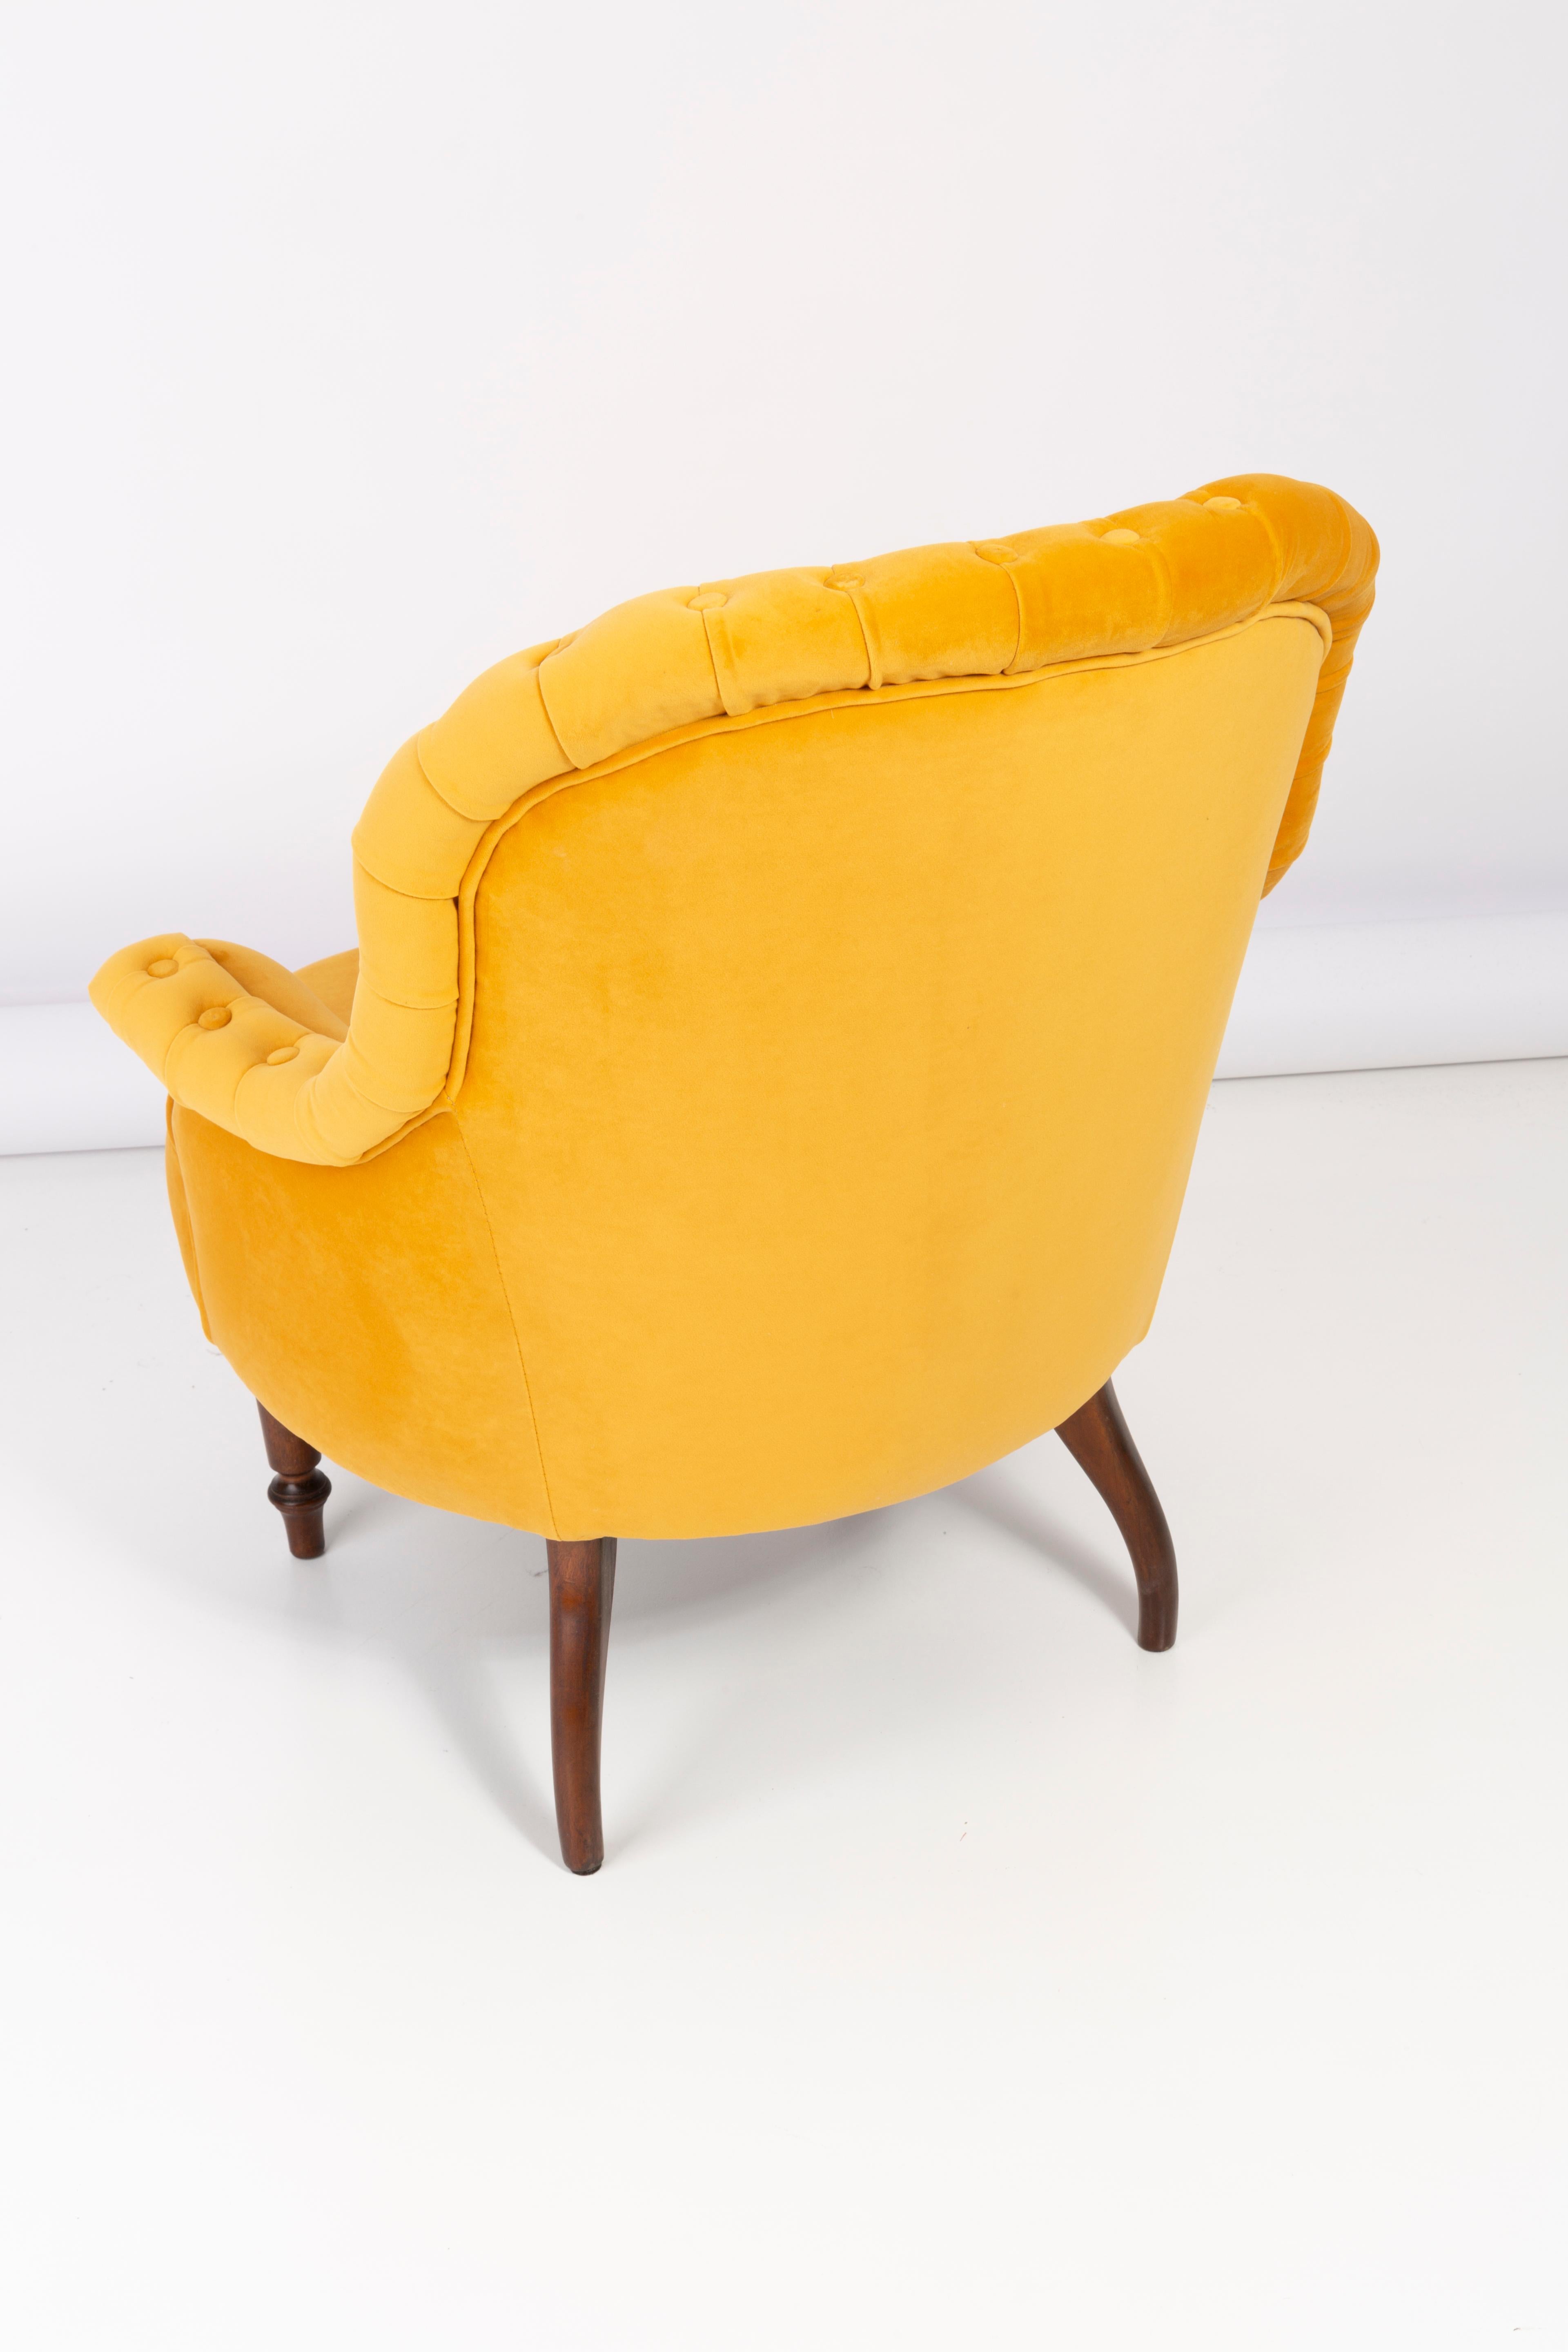 Pair of Unique Yellow Mustard Armchairs, 1930s, Germany For Sale 8